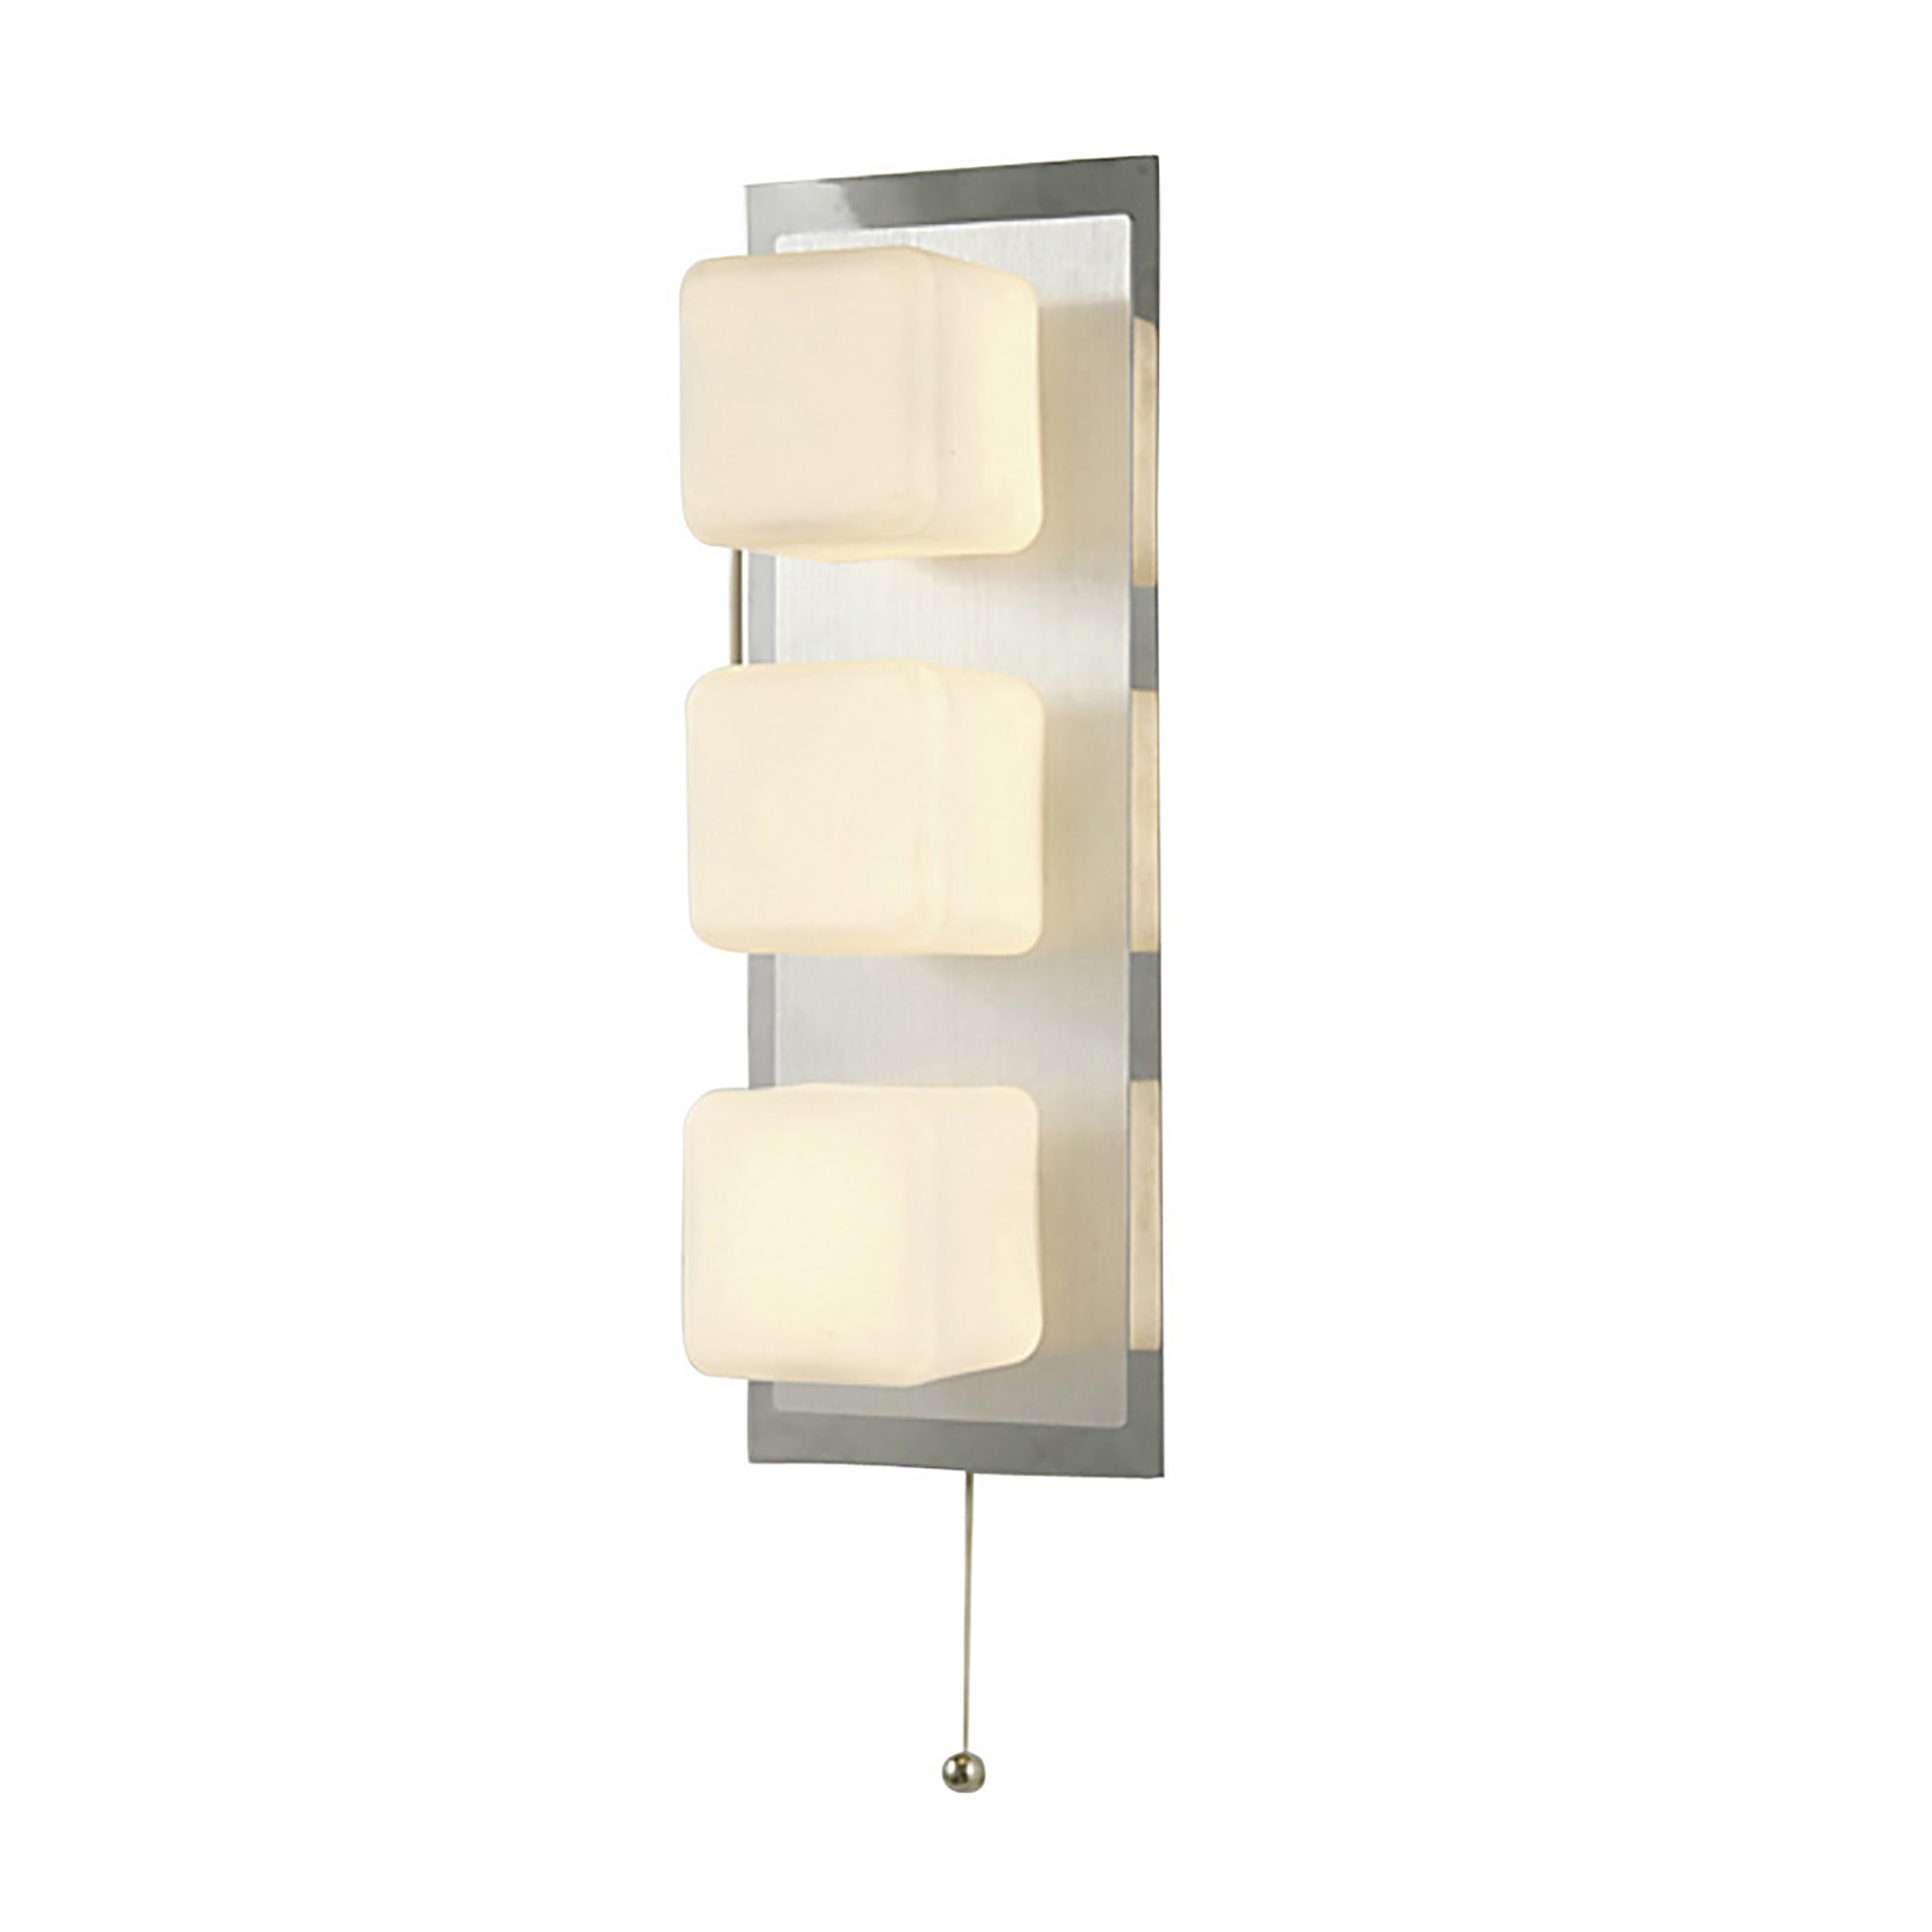 IL20381  Cube IP44 Switched Wall Lamp 3 Light